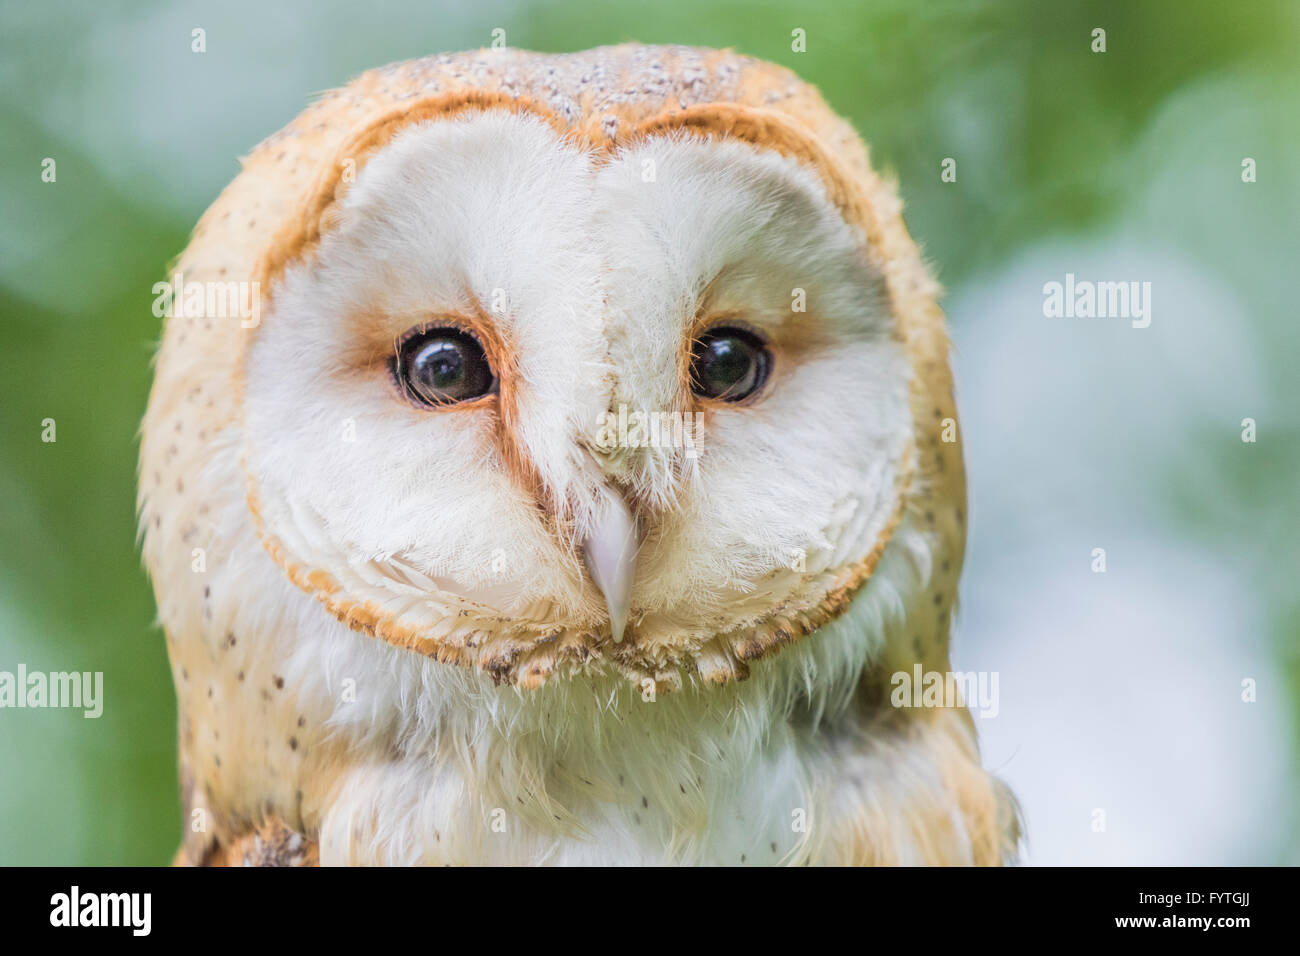 European Barn Owl, a Rescue bird, rehabilitated and trained for education and conversation purposes. Stock Photo